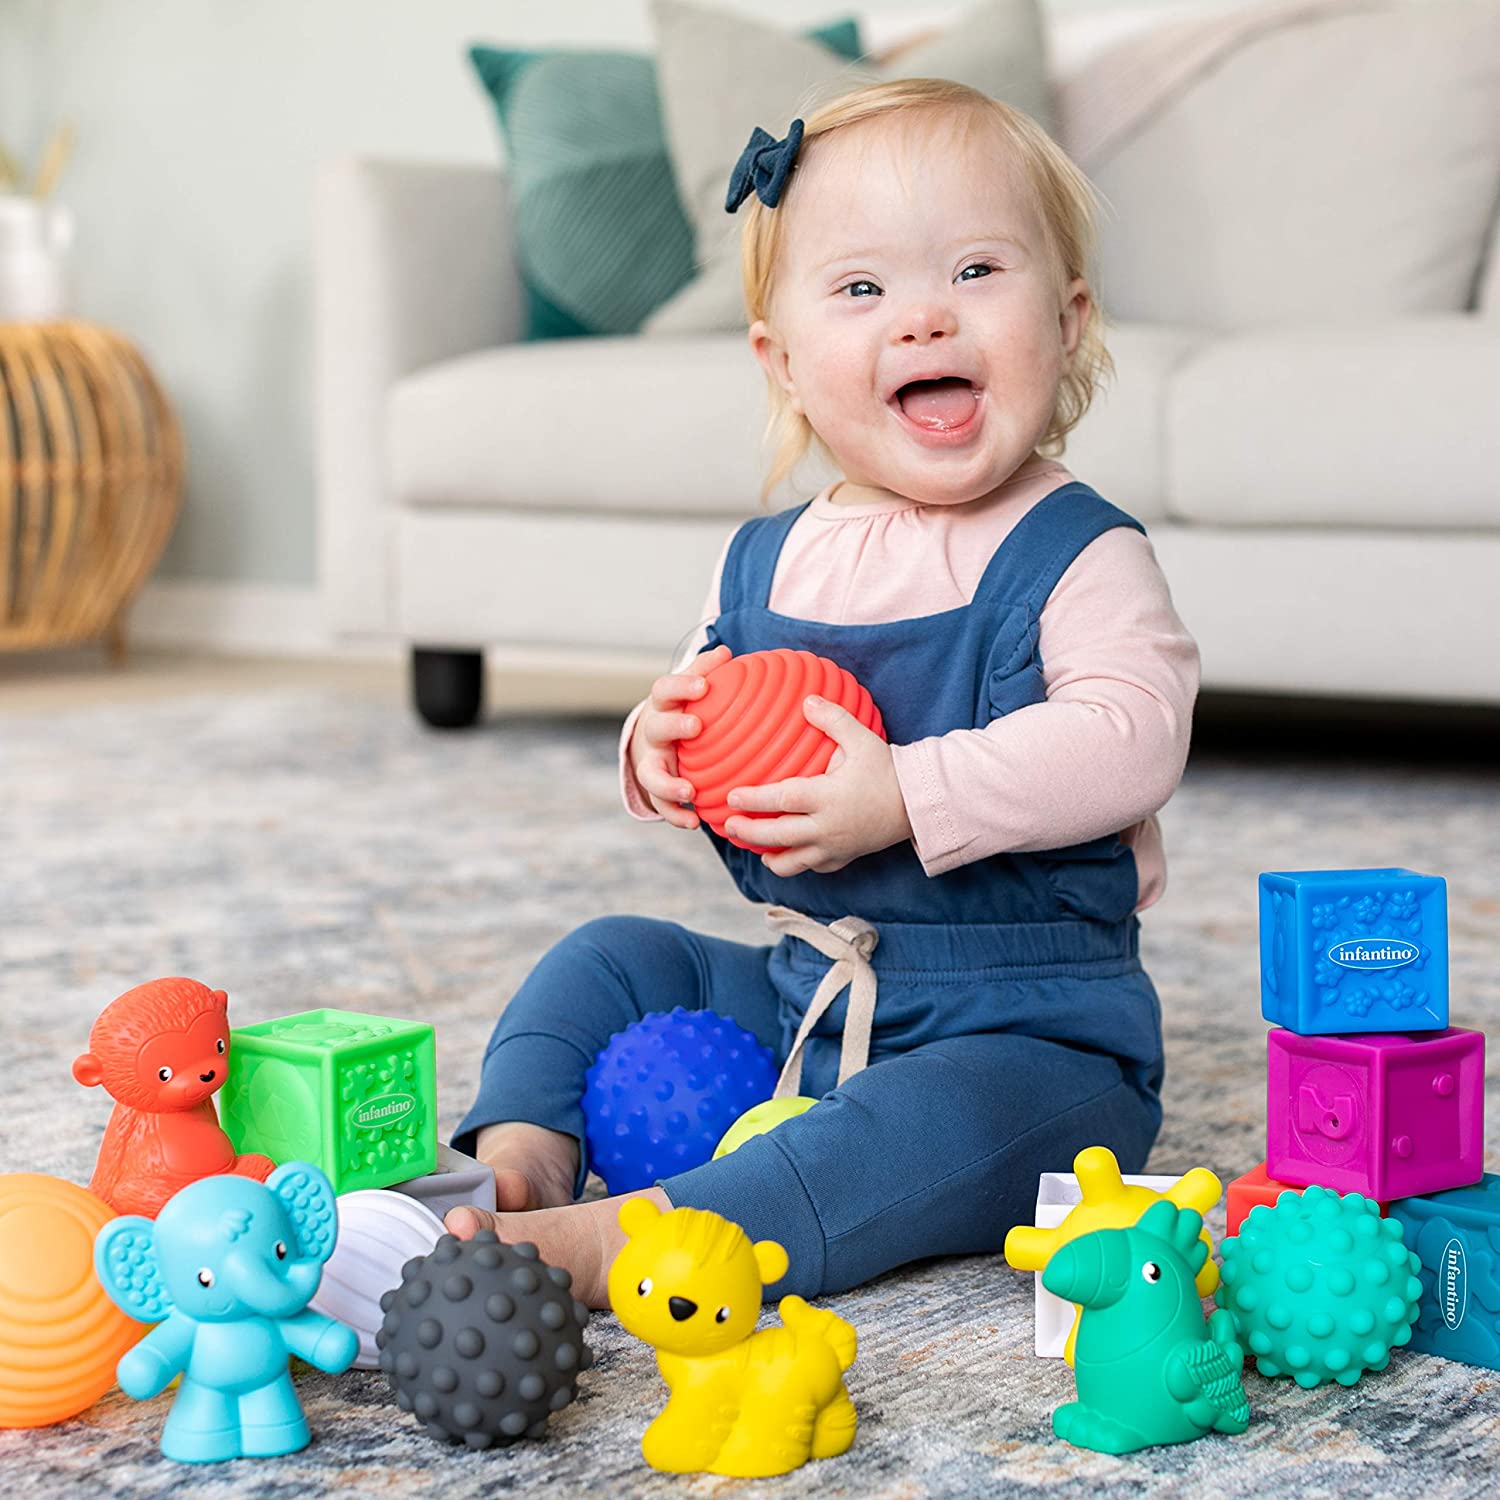 Infantino Sensory Balls Blocks & Buddies - 20 piece basics set for sensory exploration, fine and gross motor skill development and early introduction to colors, counting, sorting and numbers